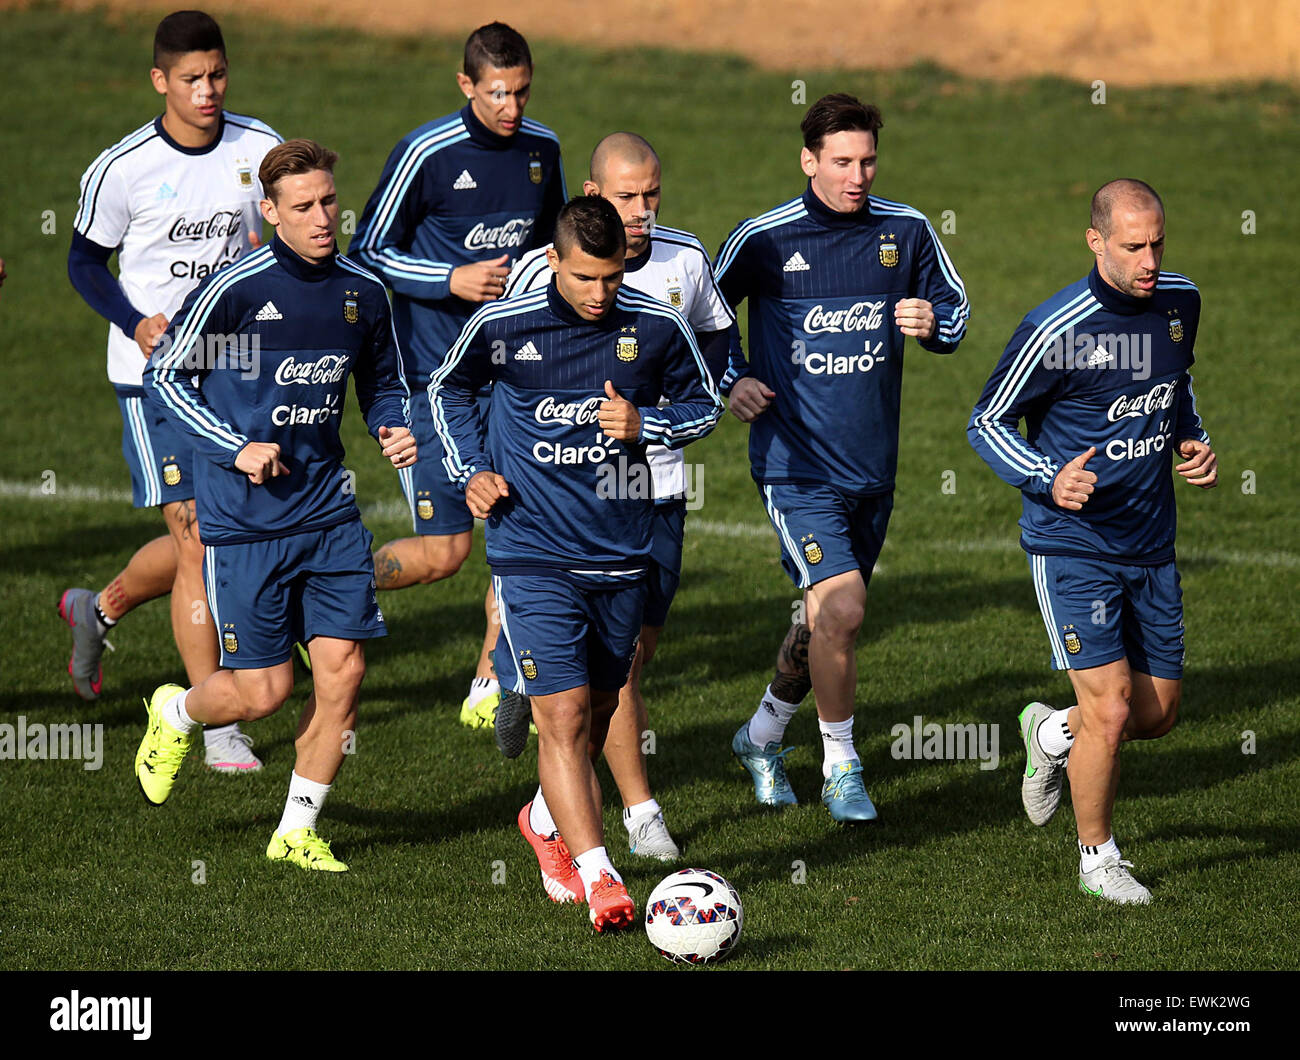 Vina Del Mar, Chile. 27th June, 2015. Argentina's National Team players Marcos Rojo (L, back), Angel Di Maria (2n L, back), Lucas Biglia (L, front), Javier Mascherano (C, back), Lionel Messi (2nd R), Sergio Aguero (C, front) and Pablo Zabaleta (1st R), attend a training session in Vina del Mar, Chile, on June 27, 2015. Argentina will be play the 2015 Chile America Cup semifinal match against Paraguay on June 30. Credit:  Juan Roleri/TELAM/Xinhua/Alamy Live News Stock Photo